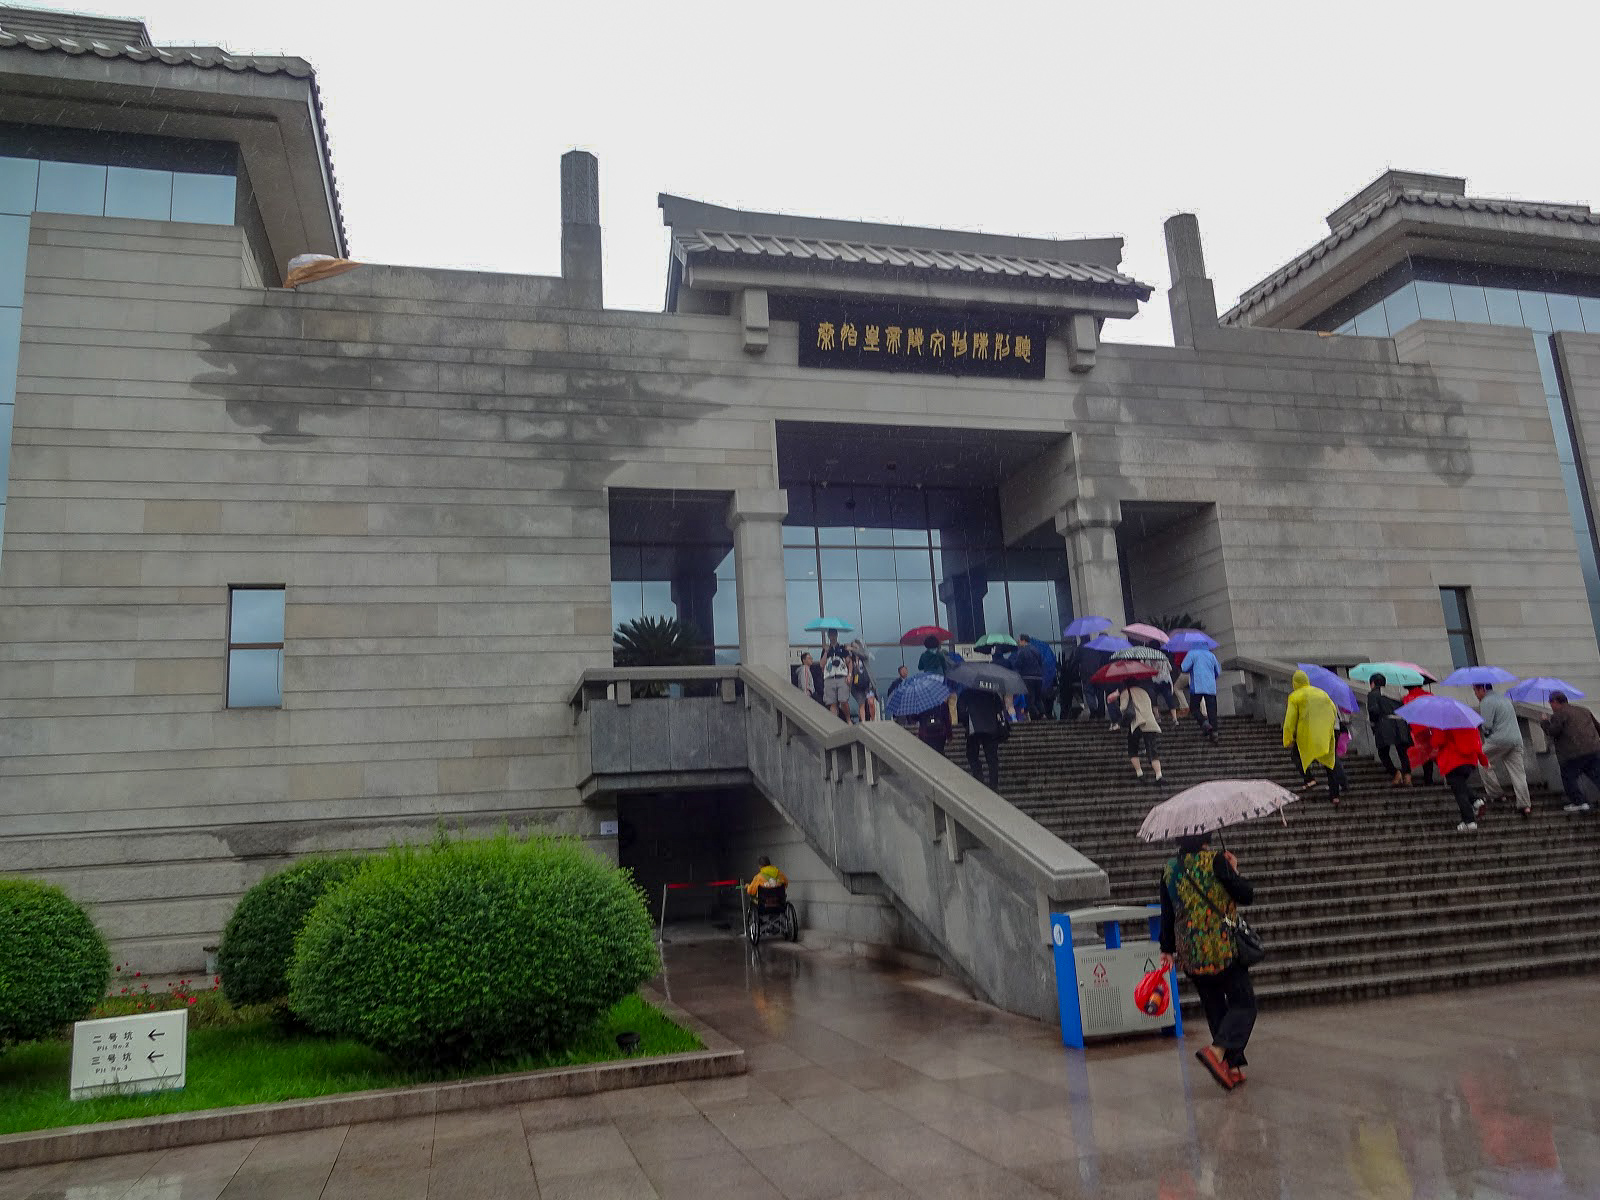 Outside of the Exhibition Hall at Emperor Qinshihuang's Mausoleum of the Terracotta Warriors, Xian, China